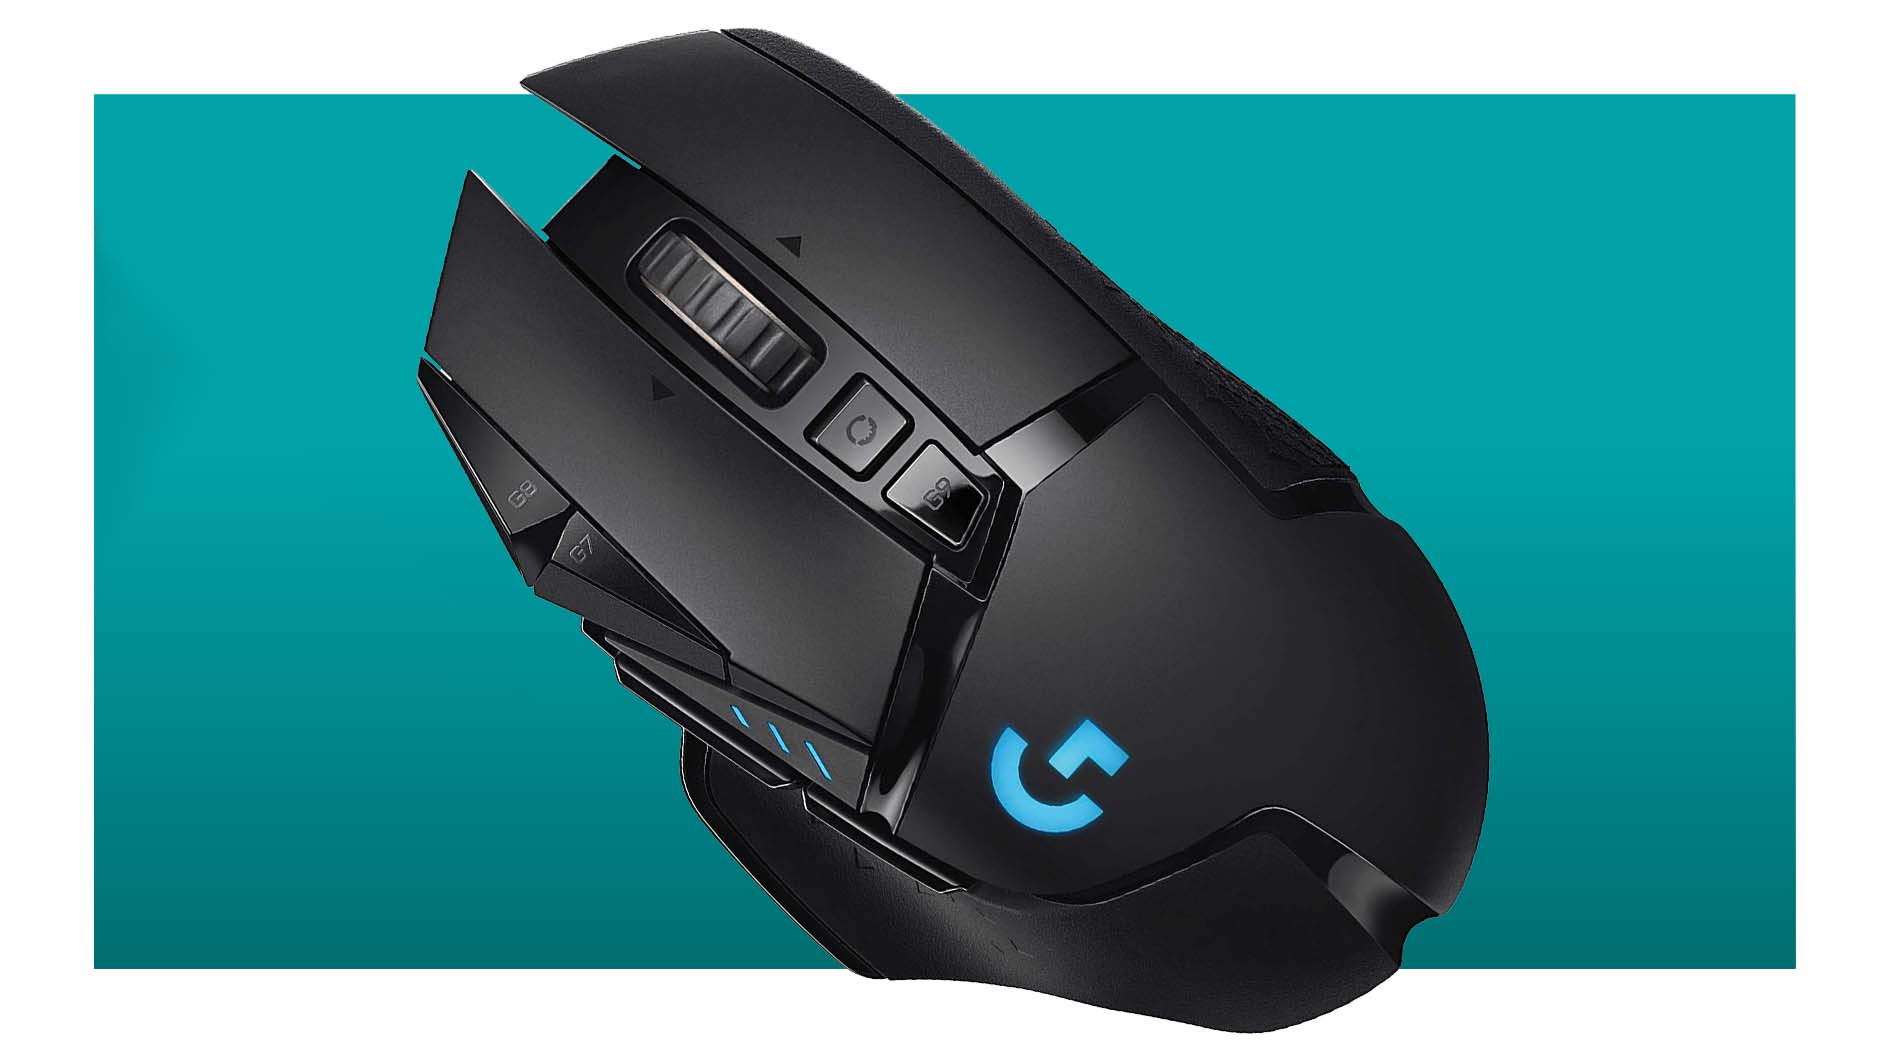  The Logitech G502 wireless is a god amongst gaming mice and $50 off 